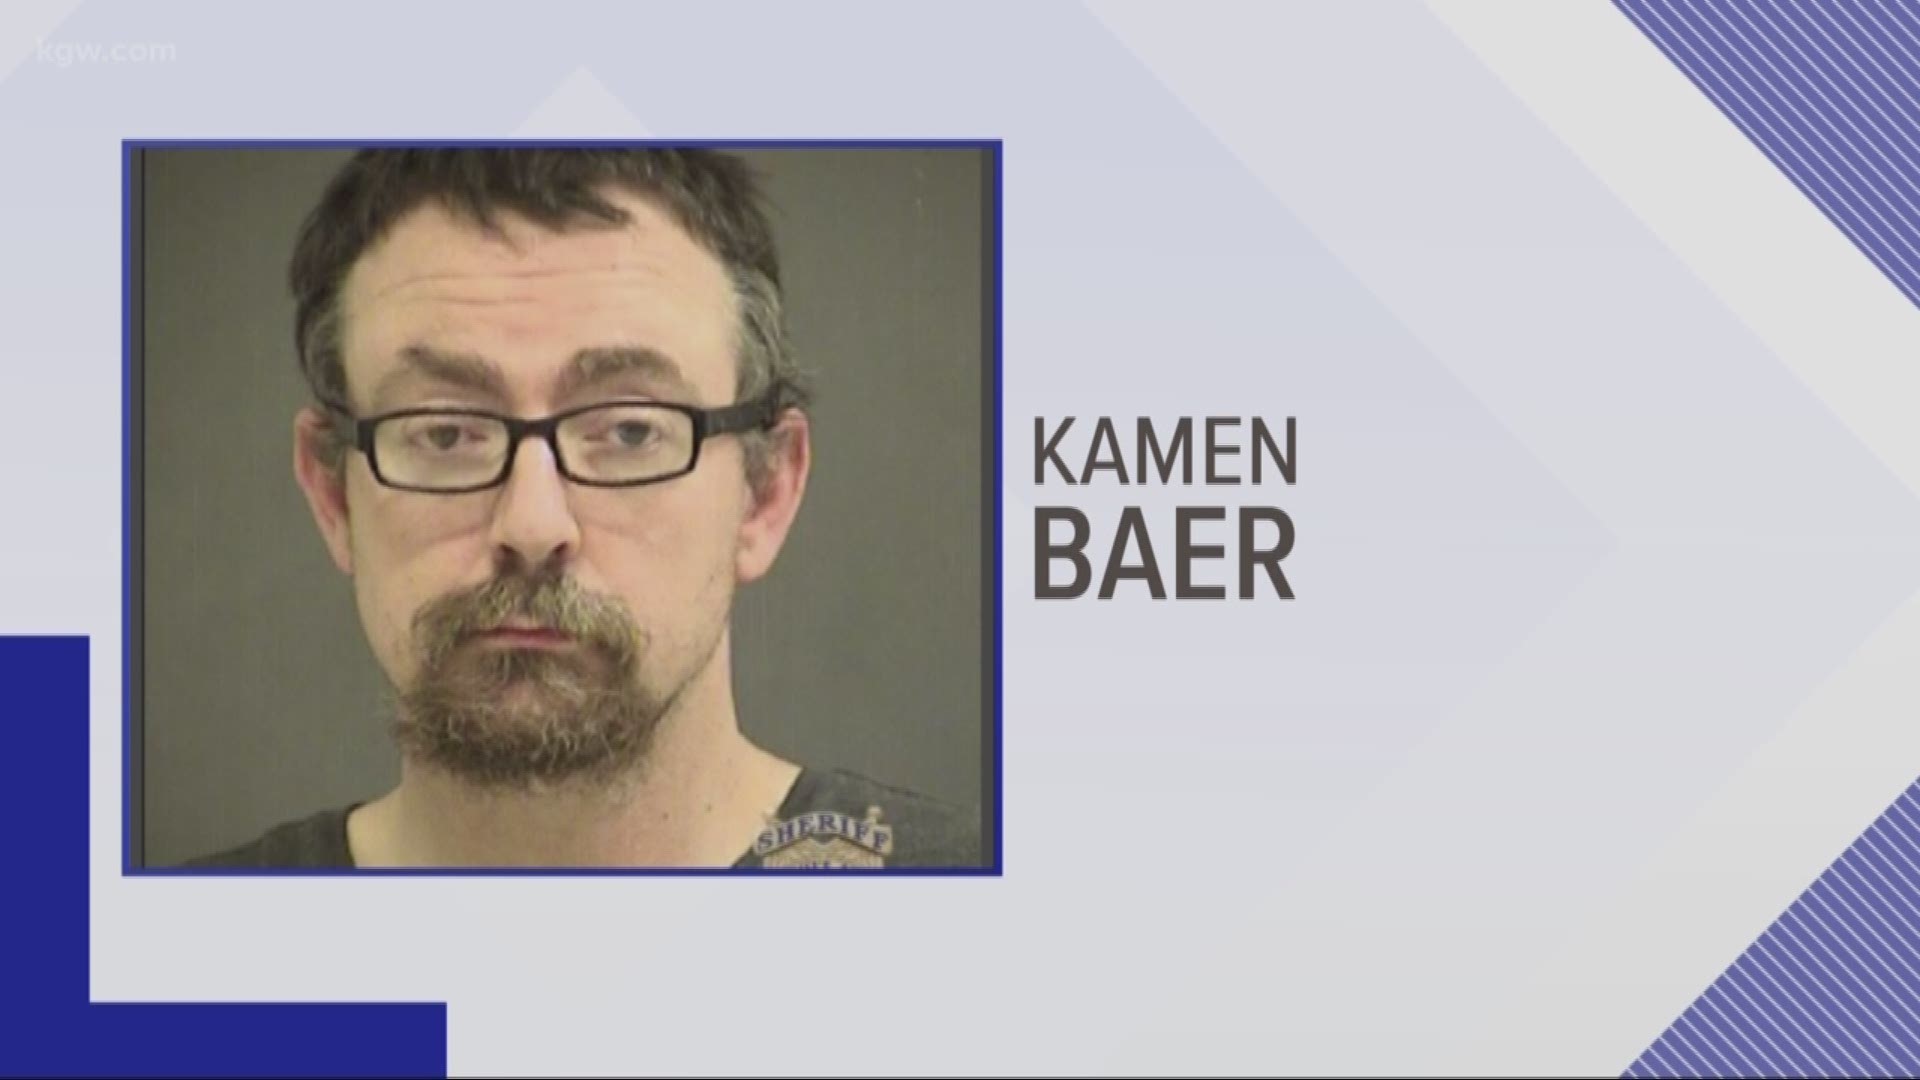 Police arrested a 38-year-old man who they believe killed a Forest Grove woman in March.